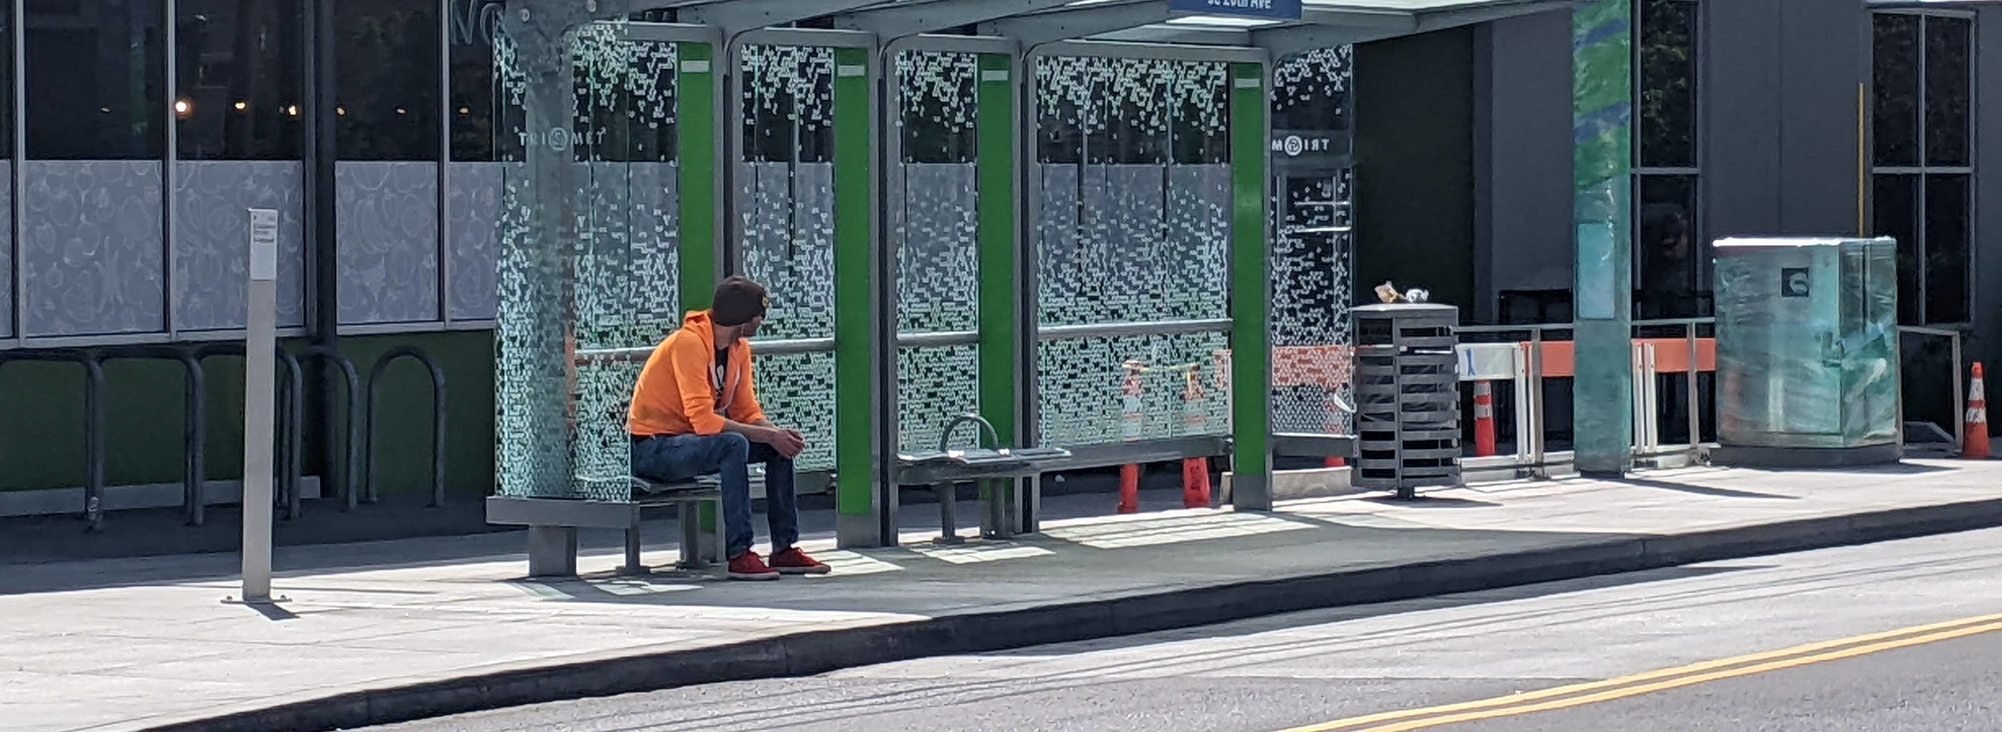 A man wearing a bright orange hoodie and red sneakers sits on a bench under a transit shelter on Southeast 20th Avenue in Portland